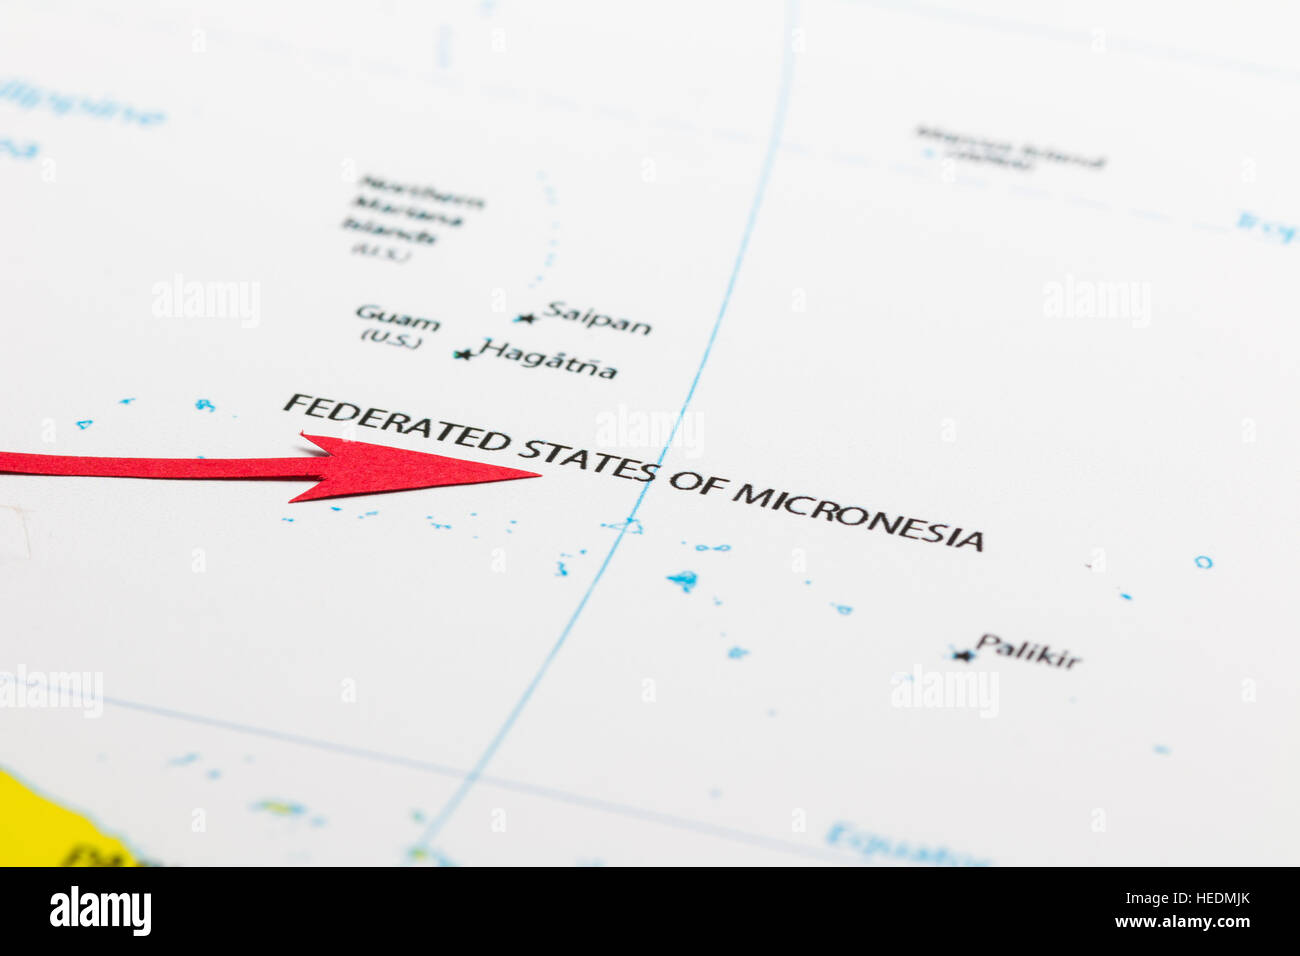 Red arrow pointing Federal States of Micronesia islands on the map of Pacific ocean Stock Photo